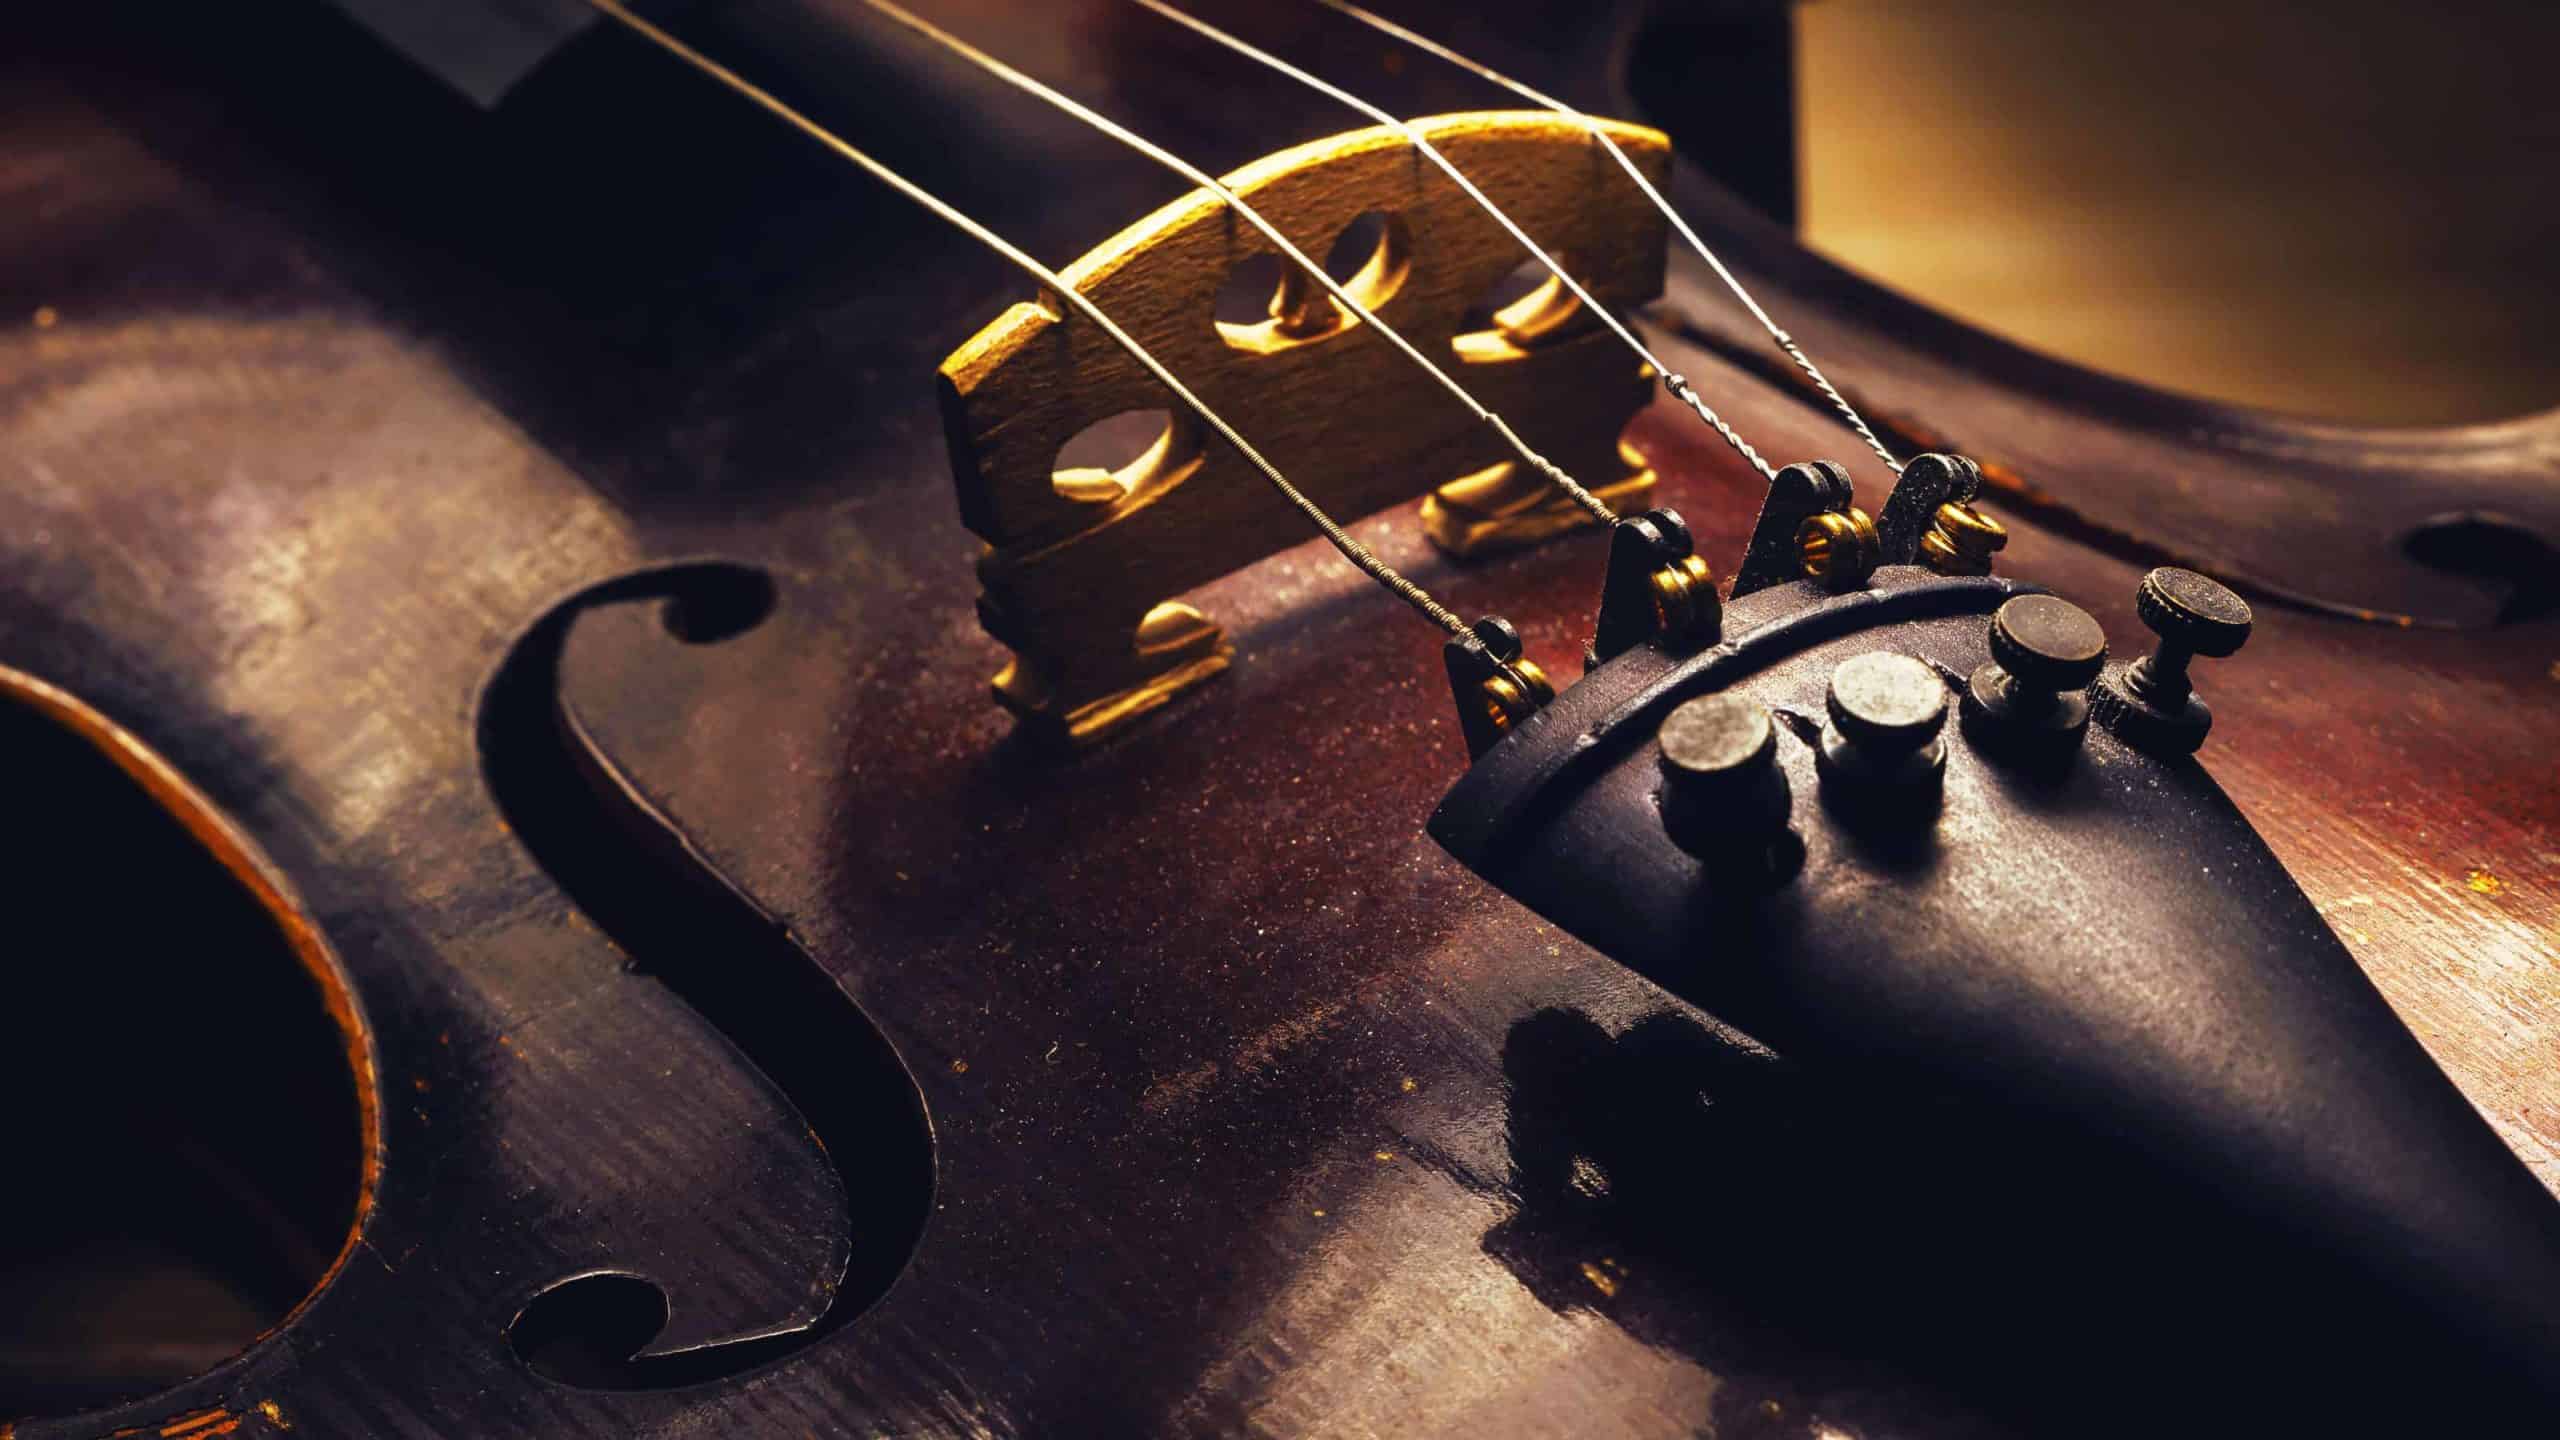 Closeup view on old dusty violin, details of wood and structure. Courtesy photo by Dejan Krsmanovic